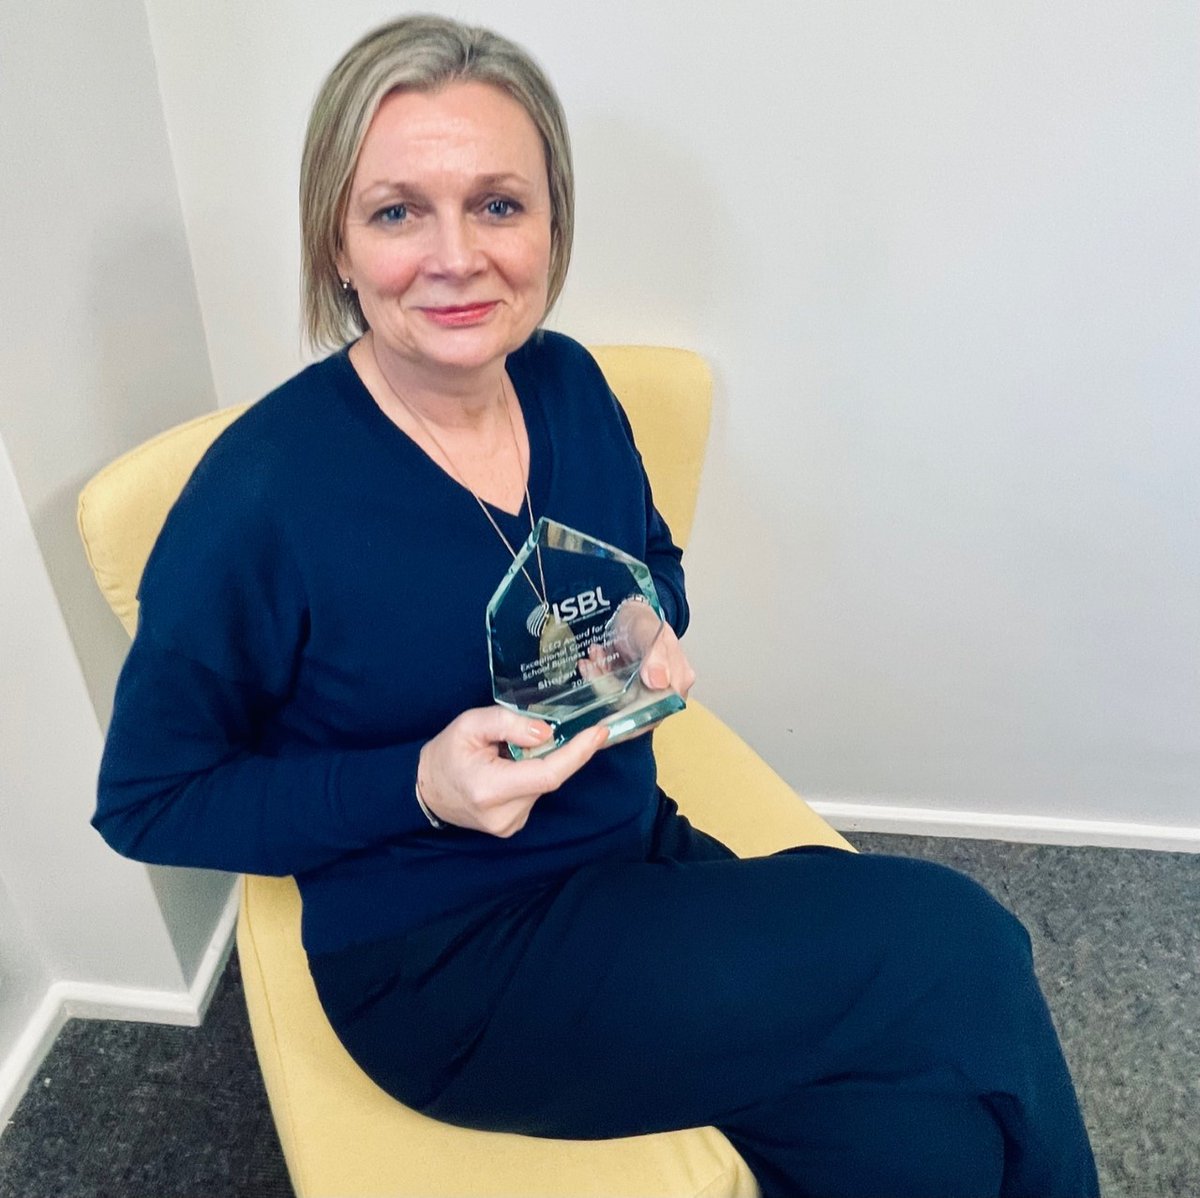 Congratulations to our @COOInclusiveMAT on receiving her ISBL CEO Award for Exceptional Contribution to School Business Leadership 👏🎉 We have a great team leading our Trust! @ISBL_news #leadership #schoolbusiness #multiacademytrusts #watford #hertfordshire @Observer_Owl